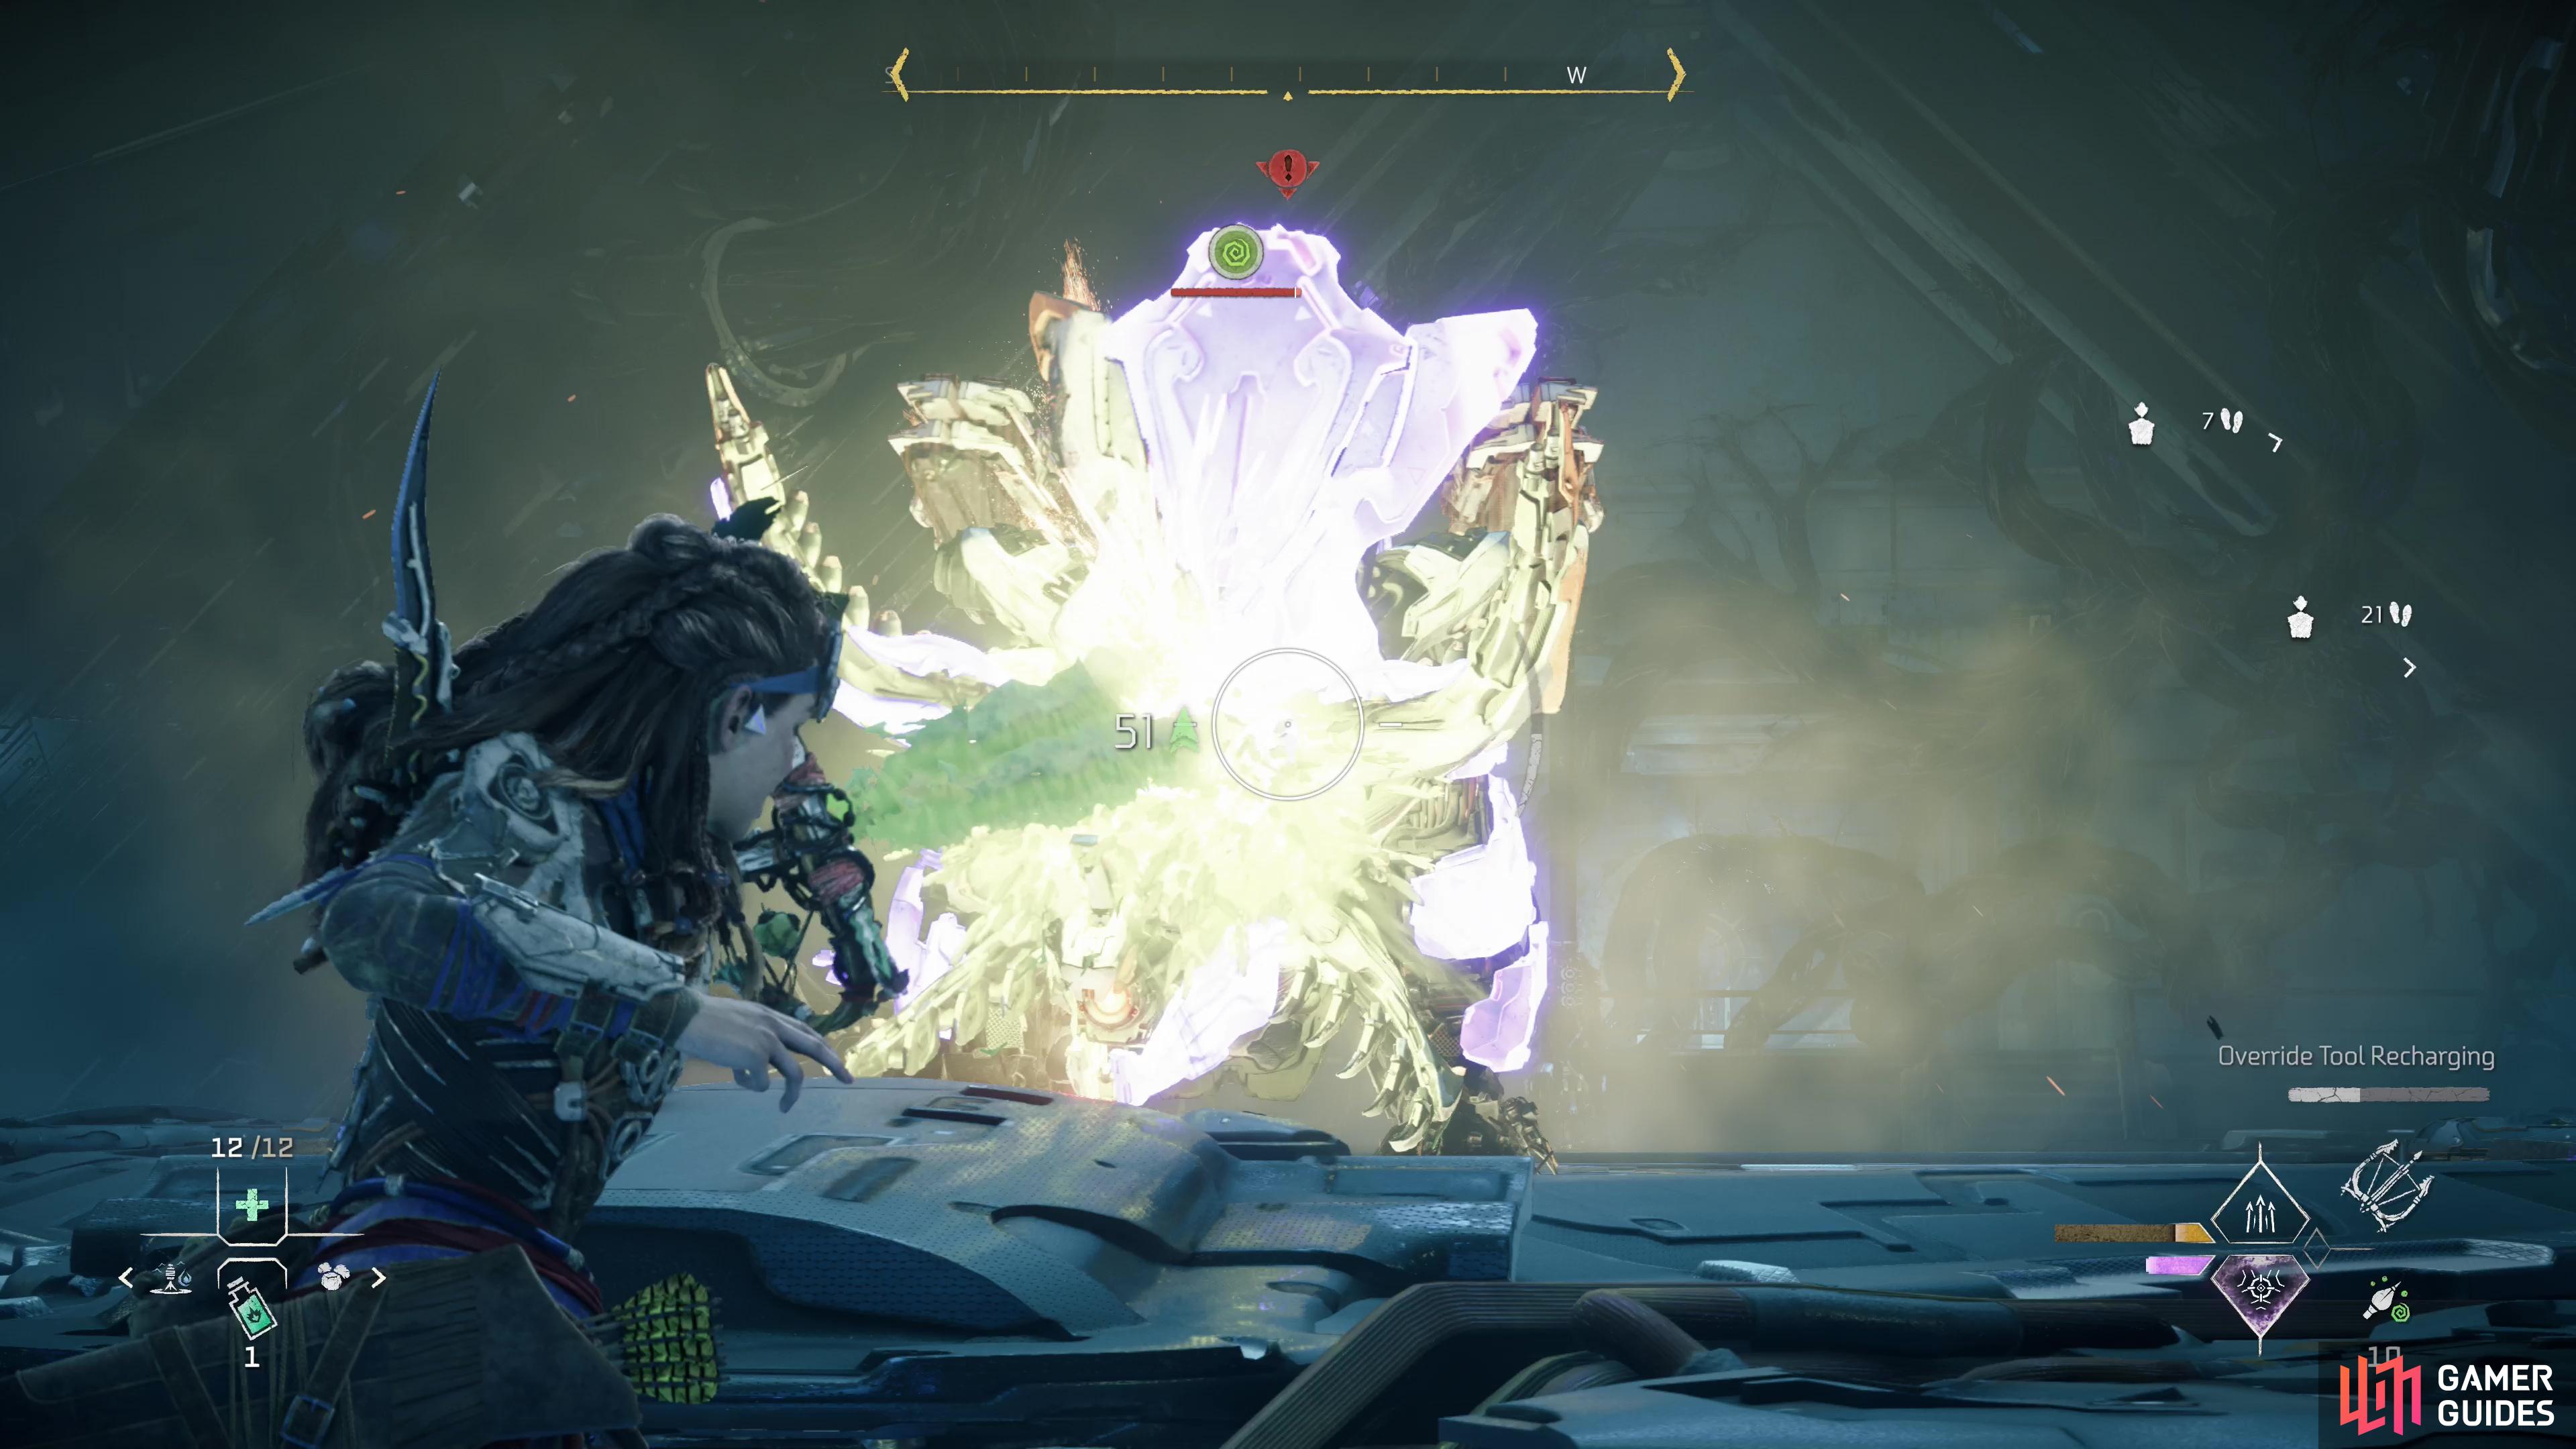 The Grimhorn is weak to Acid damage - debuff it with Acid is a fine way to start the fight.